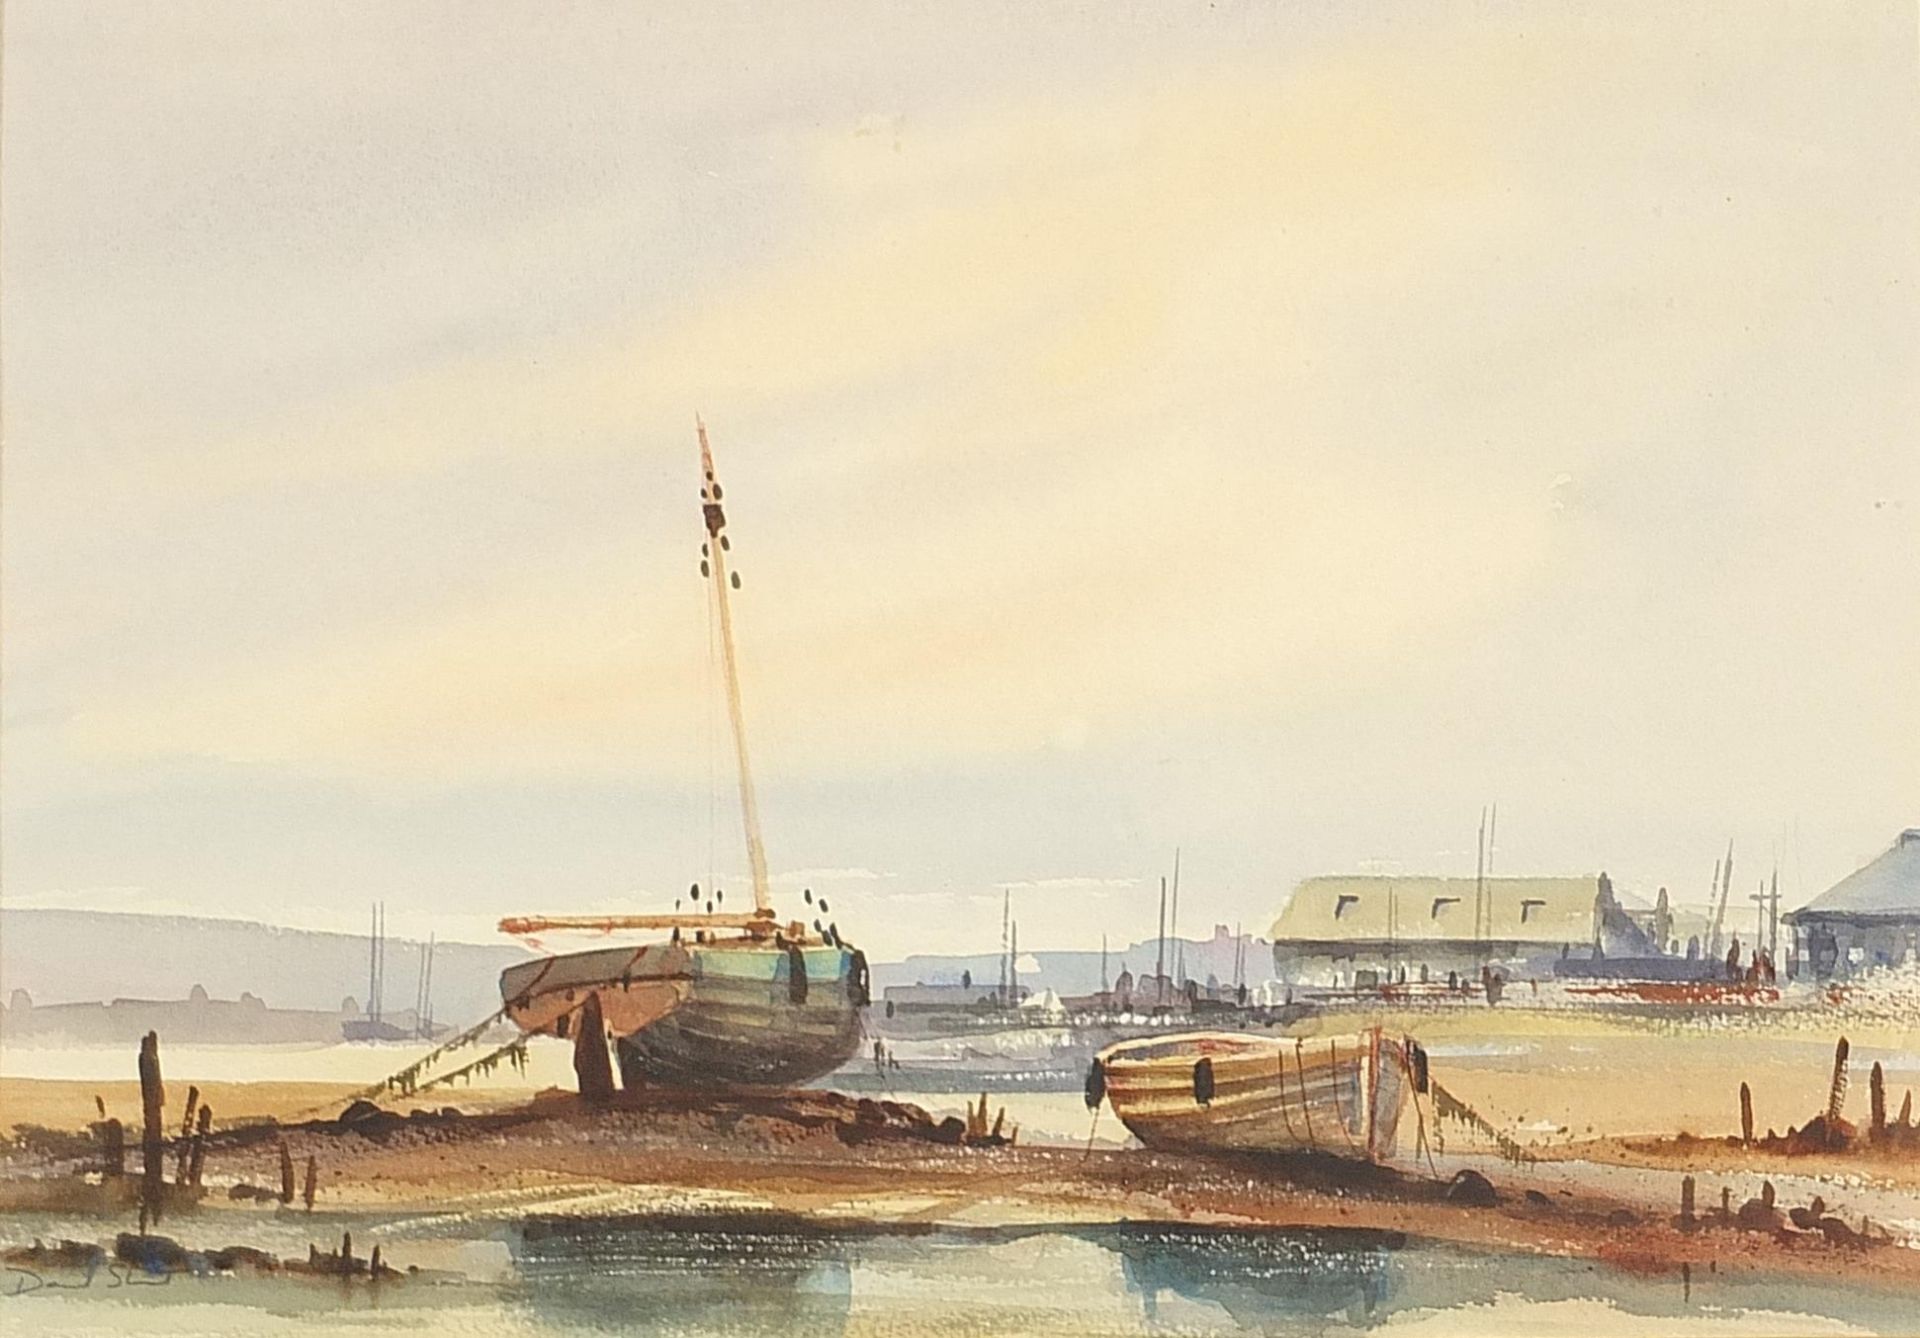 David Short - Harbour scene with moored boats, watercolour, mounted, framed and glazed, 50cm x